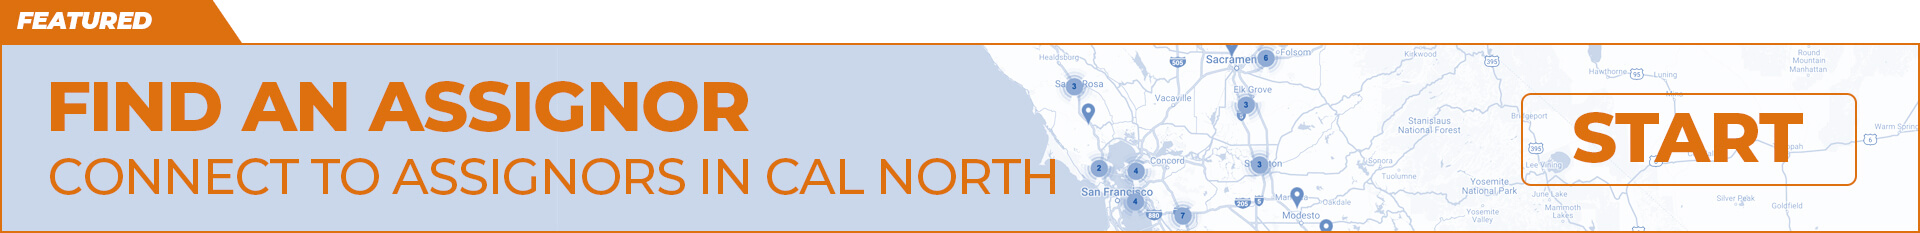 Find an Assignor: Connect to Assignors in Cal North